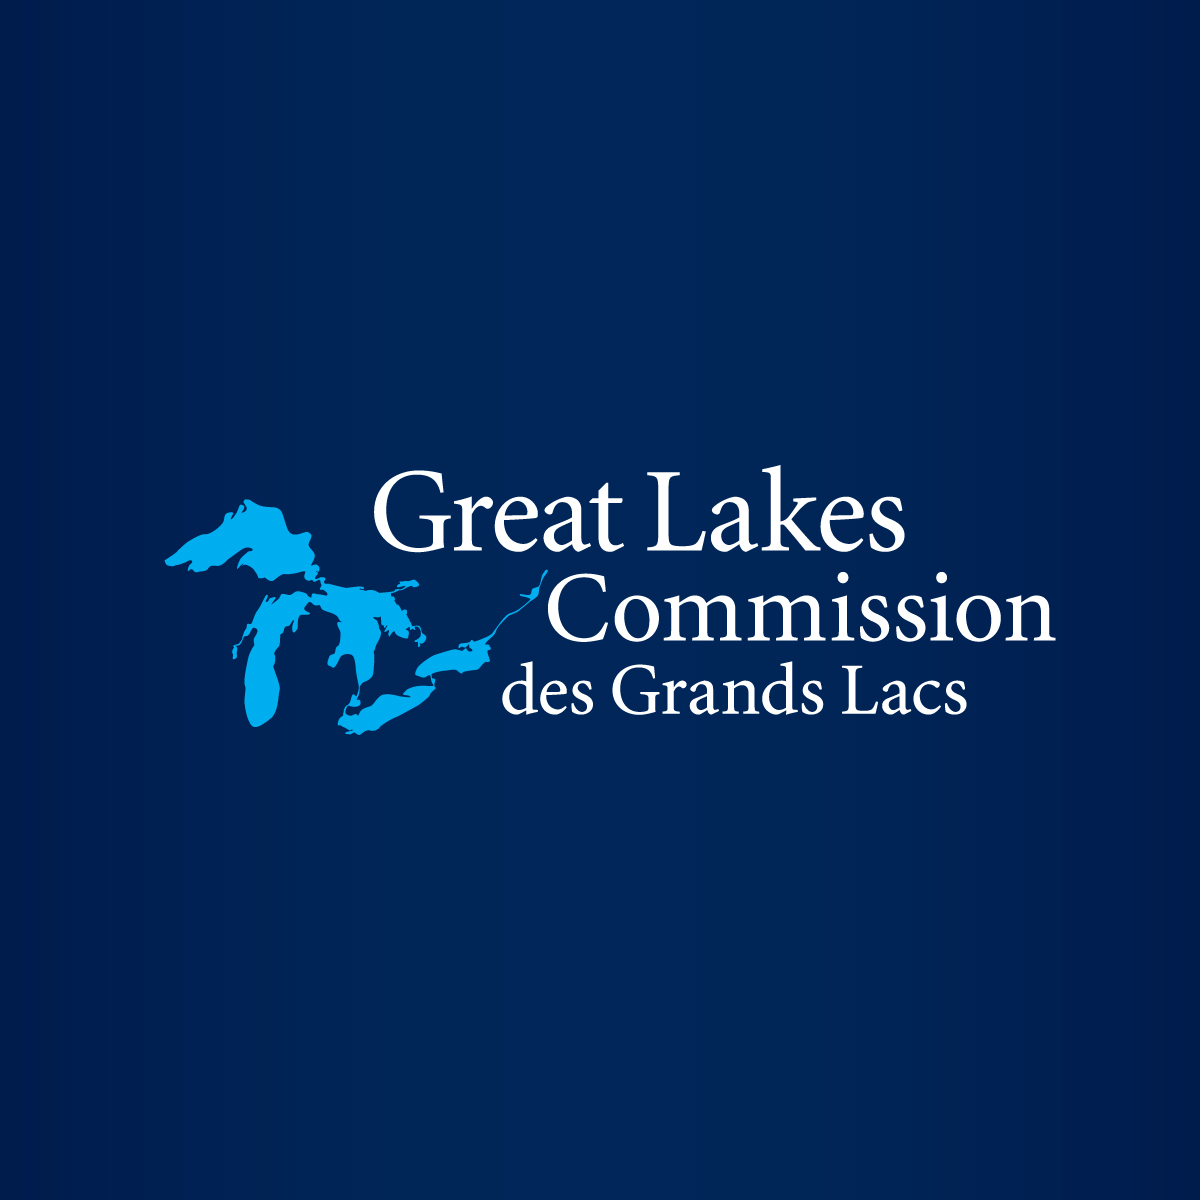 life on lake erie photo contest seeks submissions